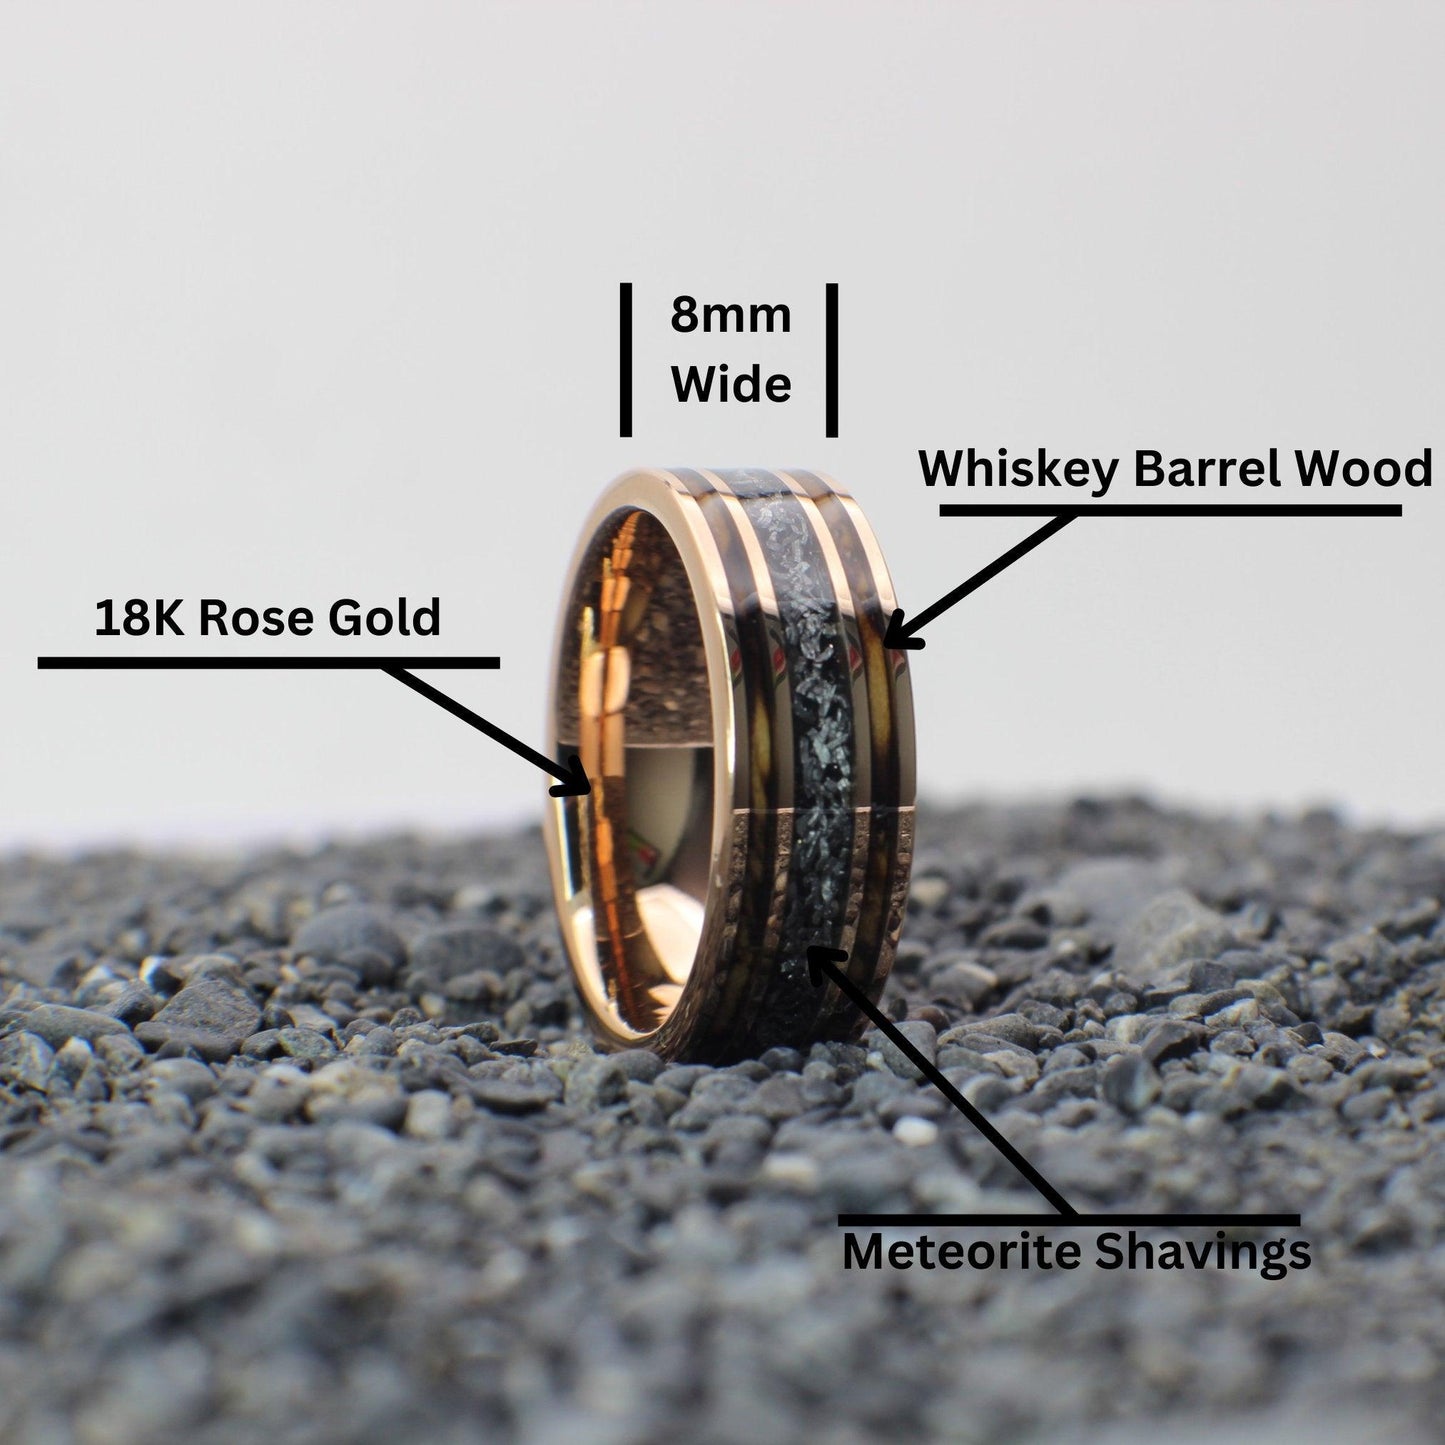 Photo showing 8mm wide men&#39;s wedding band made out of rose gold, whiskey barrel wood, and meteorite shavings.